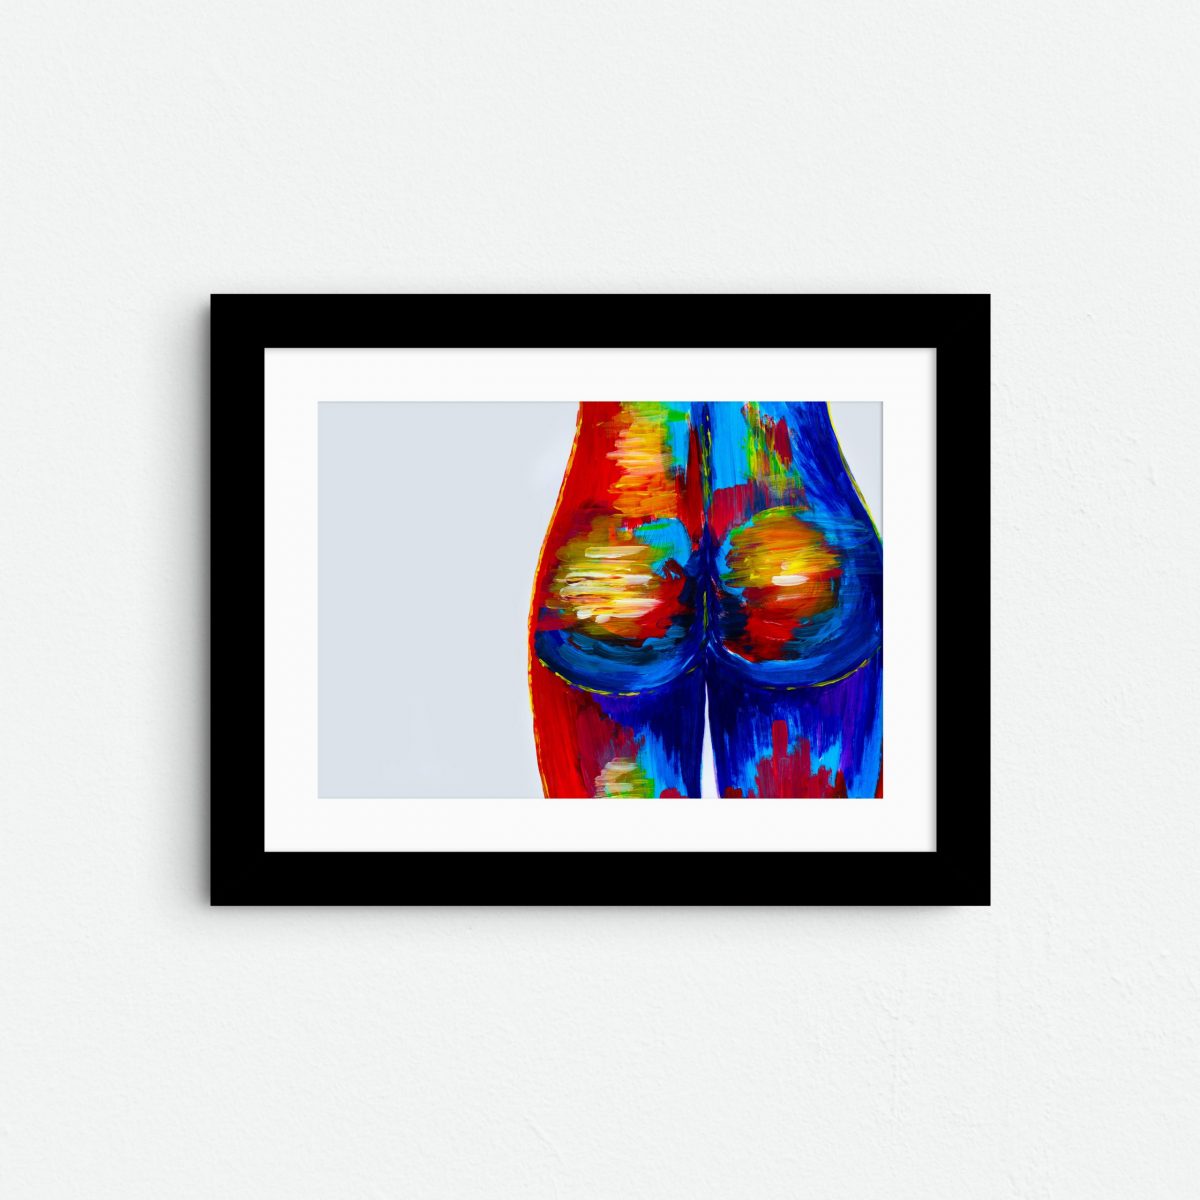 the-strokes-nude-erotic-wall-art-prints-framed-landscape